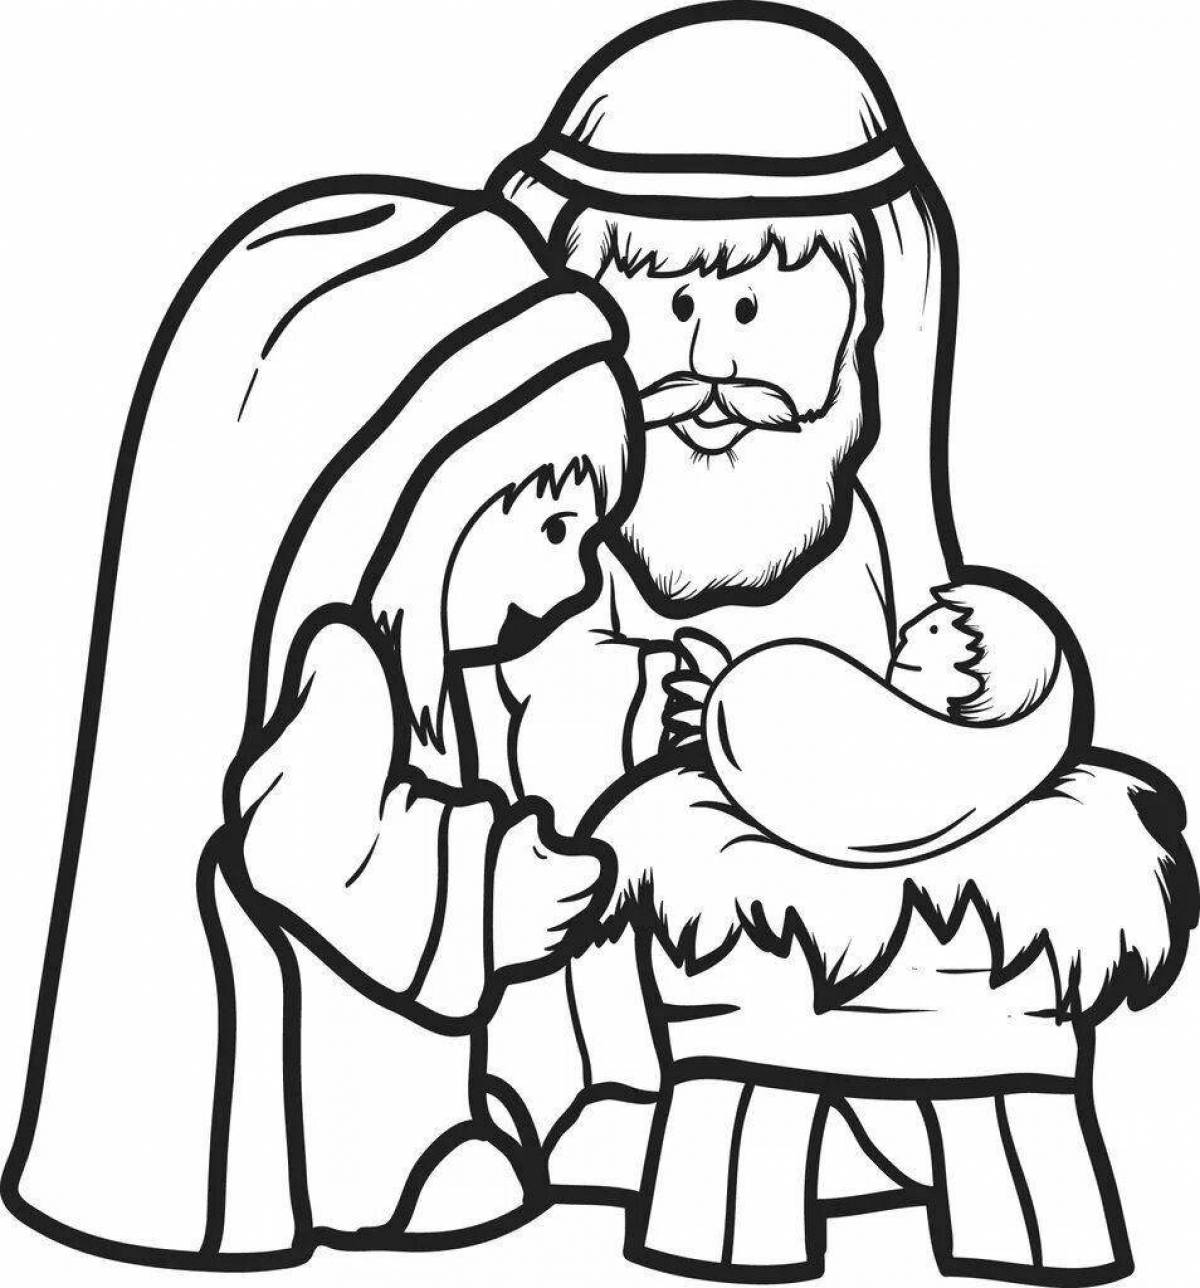 Coloring page exalted birth of jesus christ